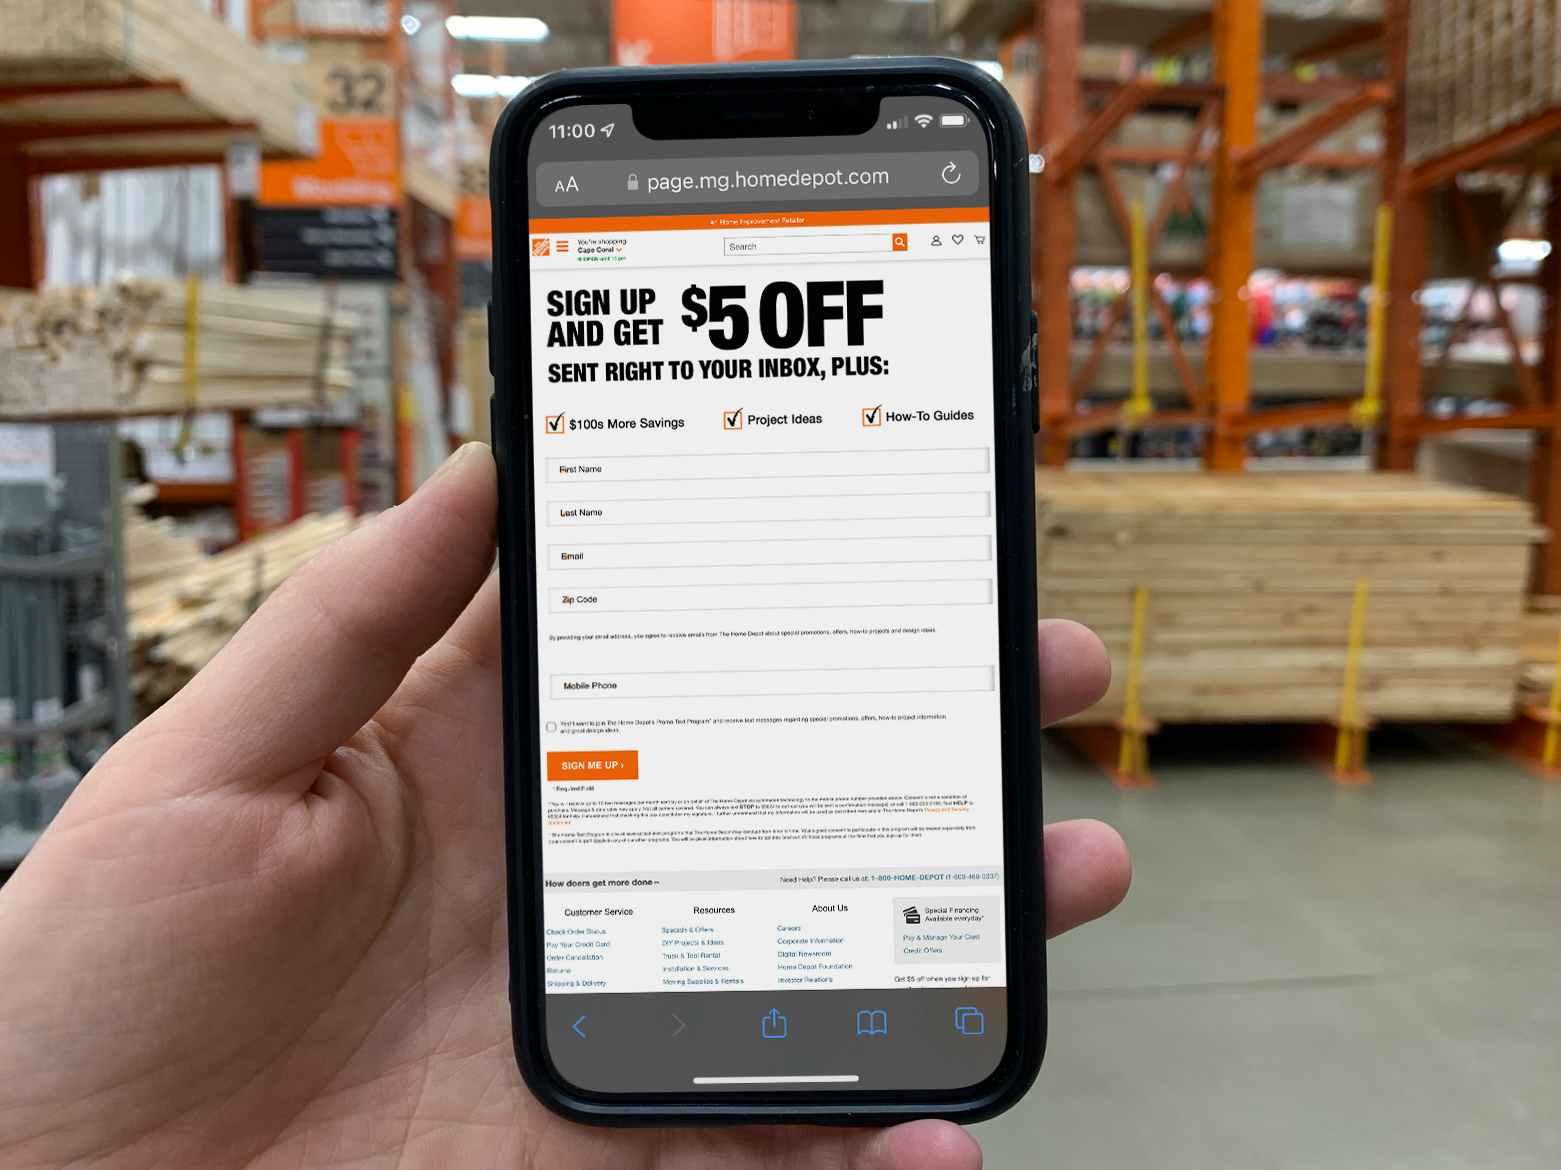 home-depot-sale-coupons-sign-up-garden-club-emails-texts-phone